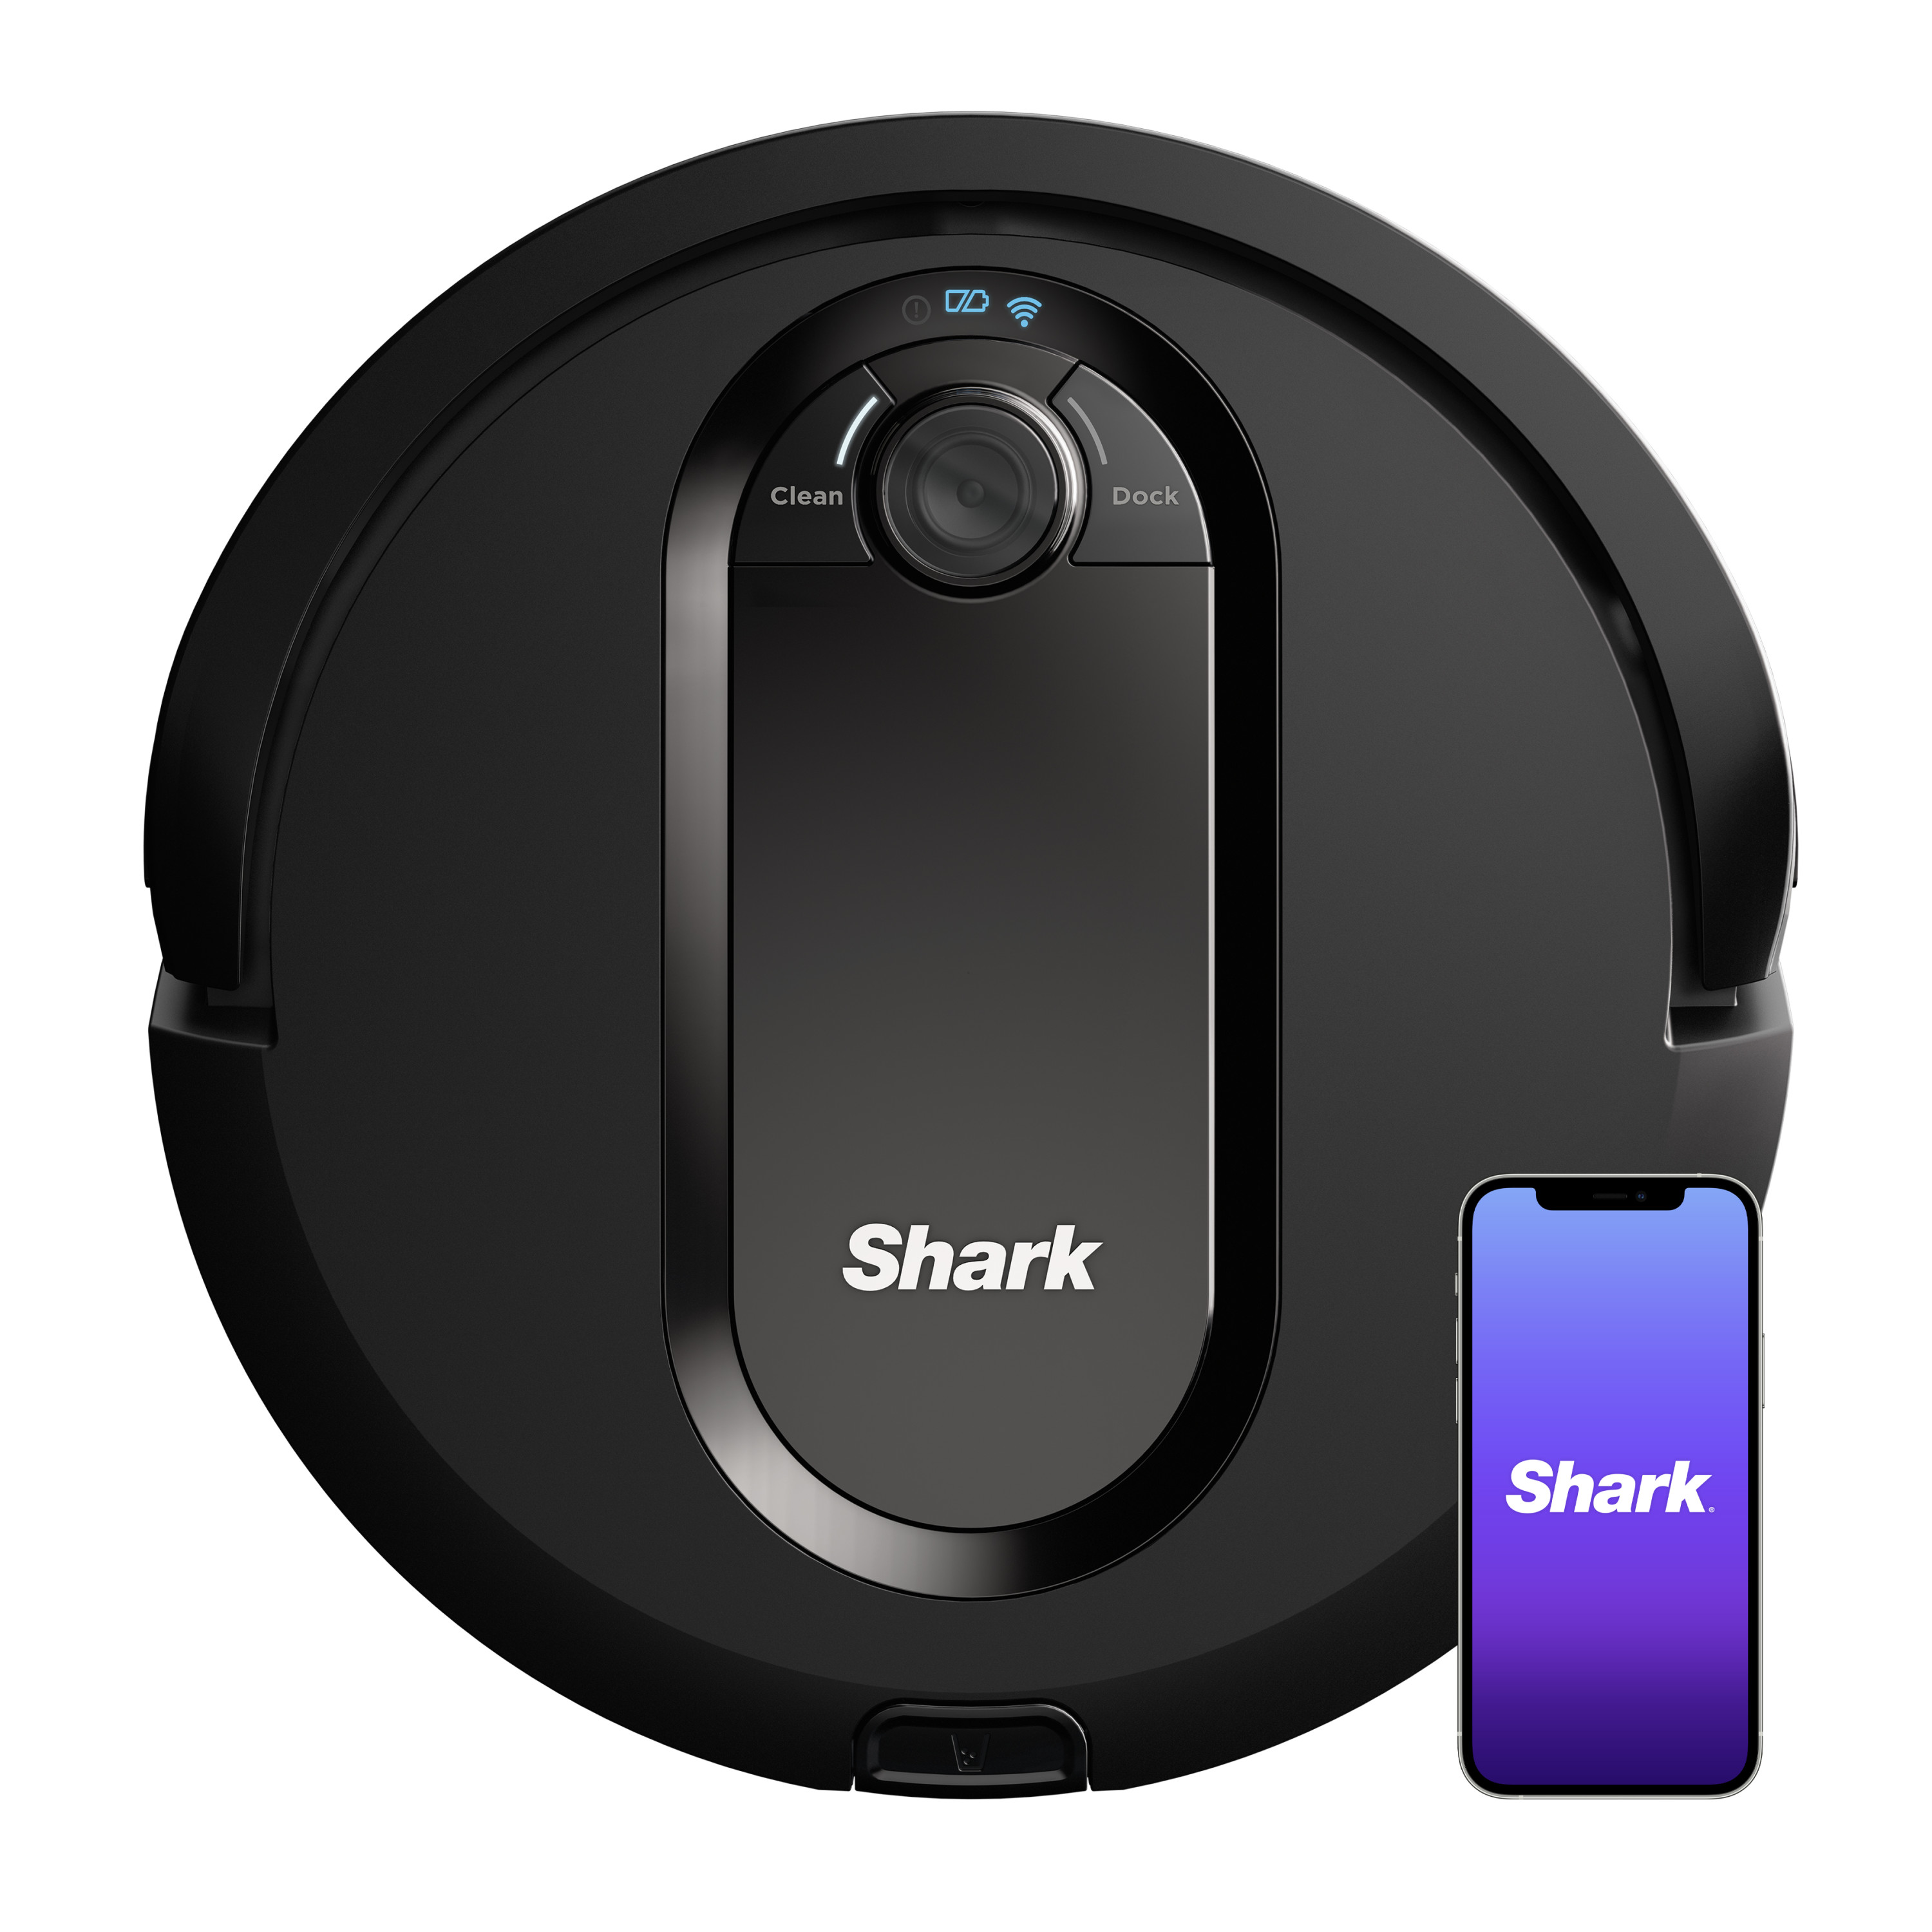 Shark EZ Robot Vacuum with Row-by-Row Cleaning, Powerful Suction, Wi-Fi, Carpets & Hard Floors,RV990 - image 1 of 9